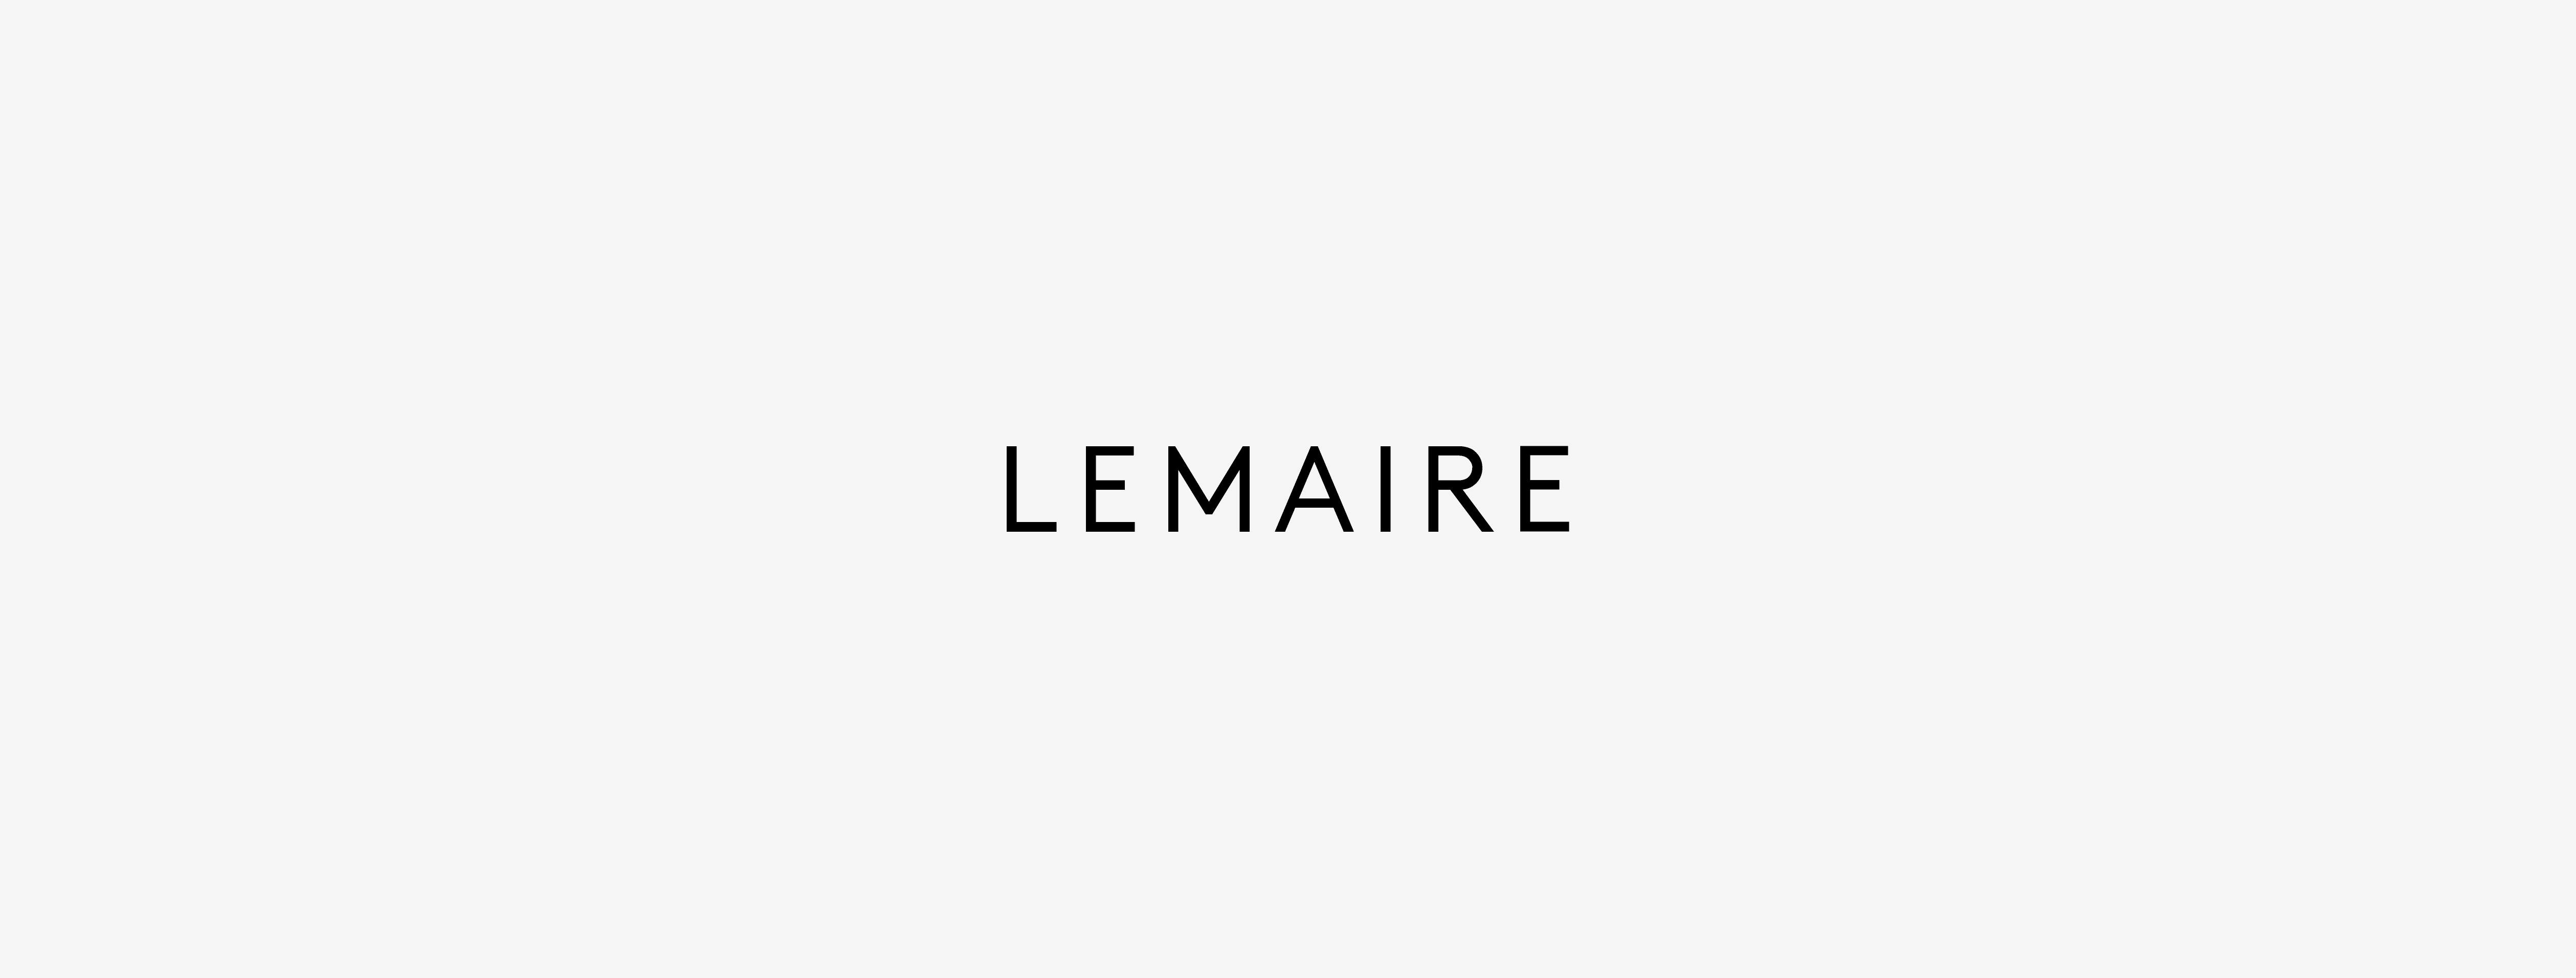 LEMAIRE